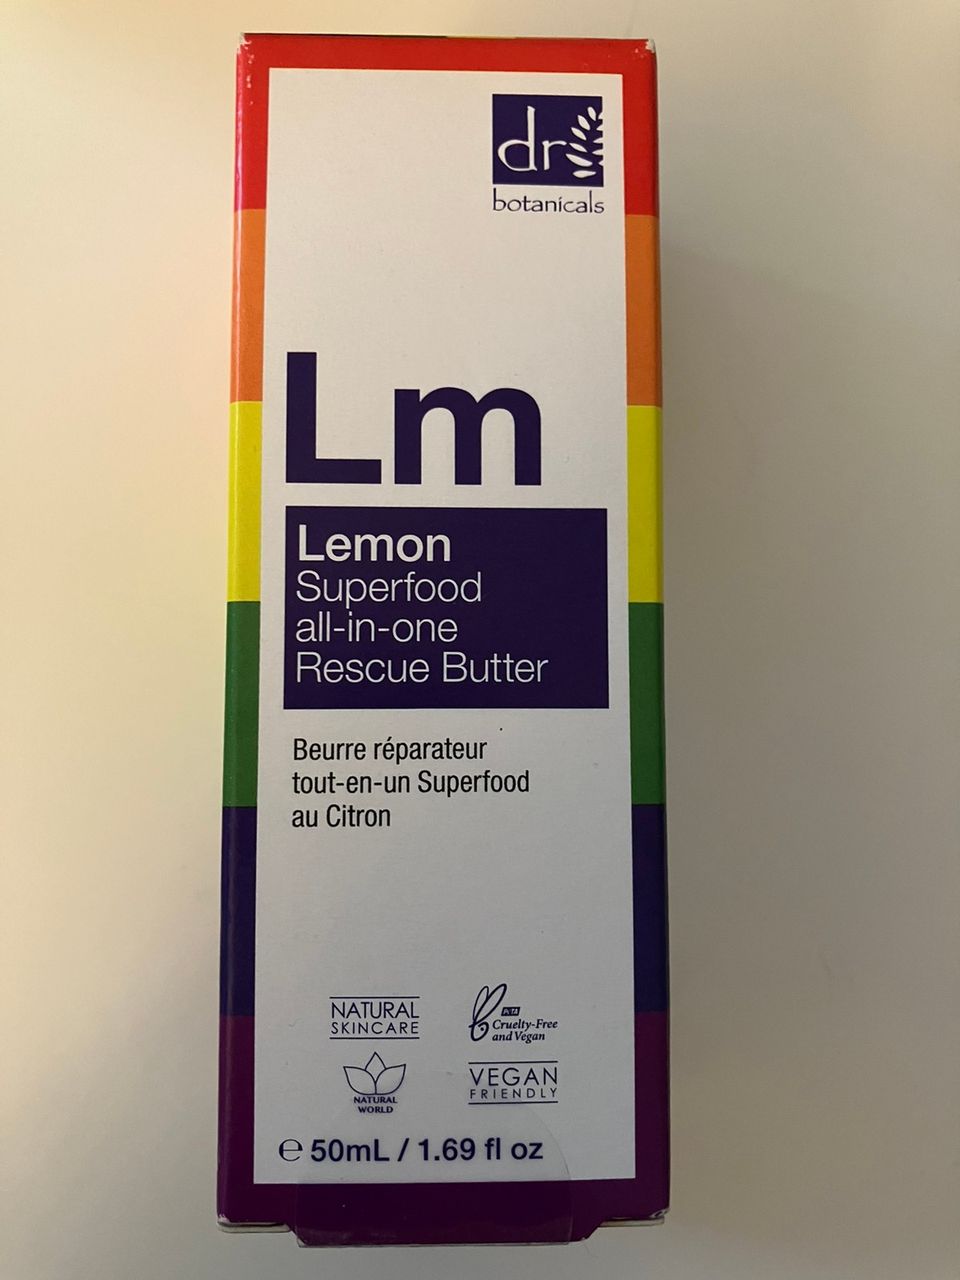 Dr Botanicals LEMON SUPERFOOD ALL-IN-ONE RESCUE BUTTER